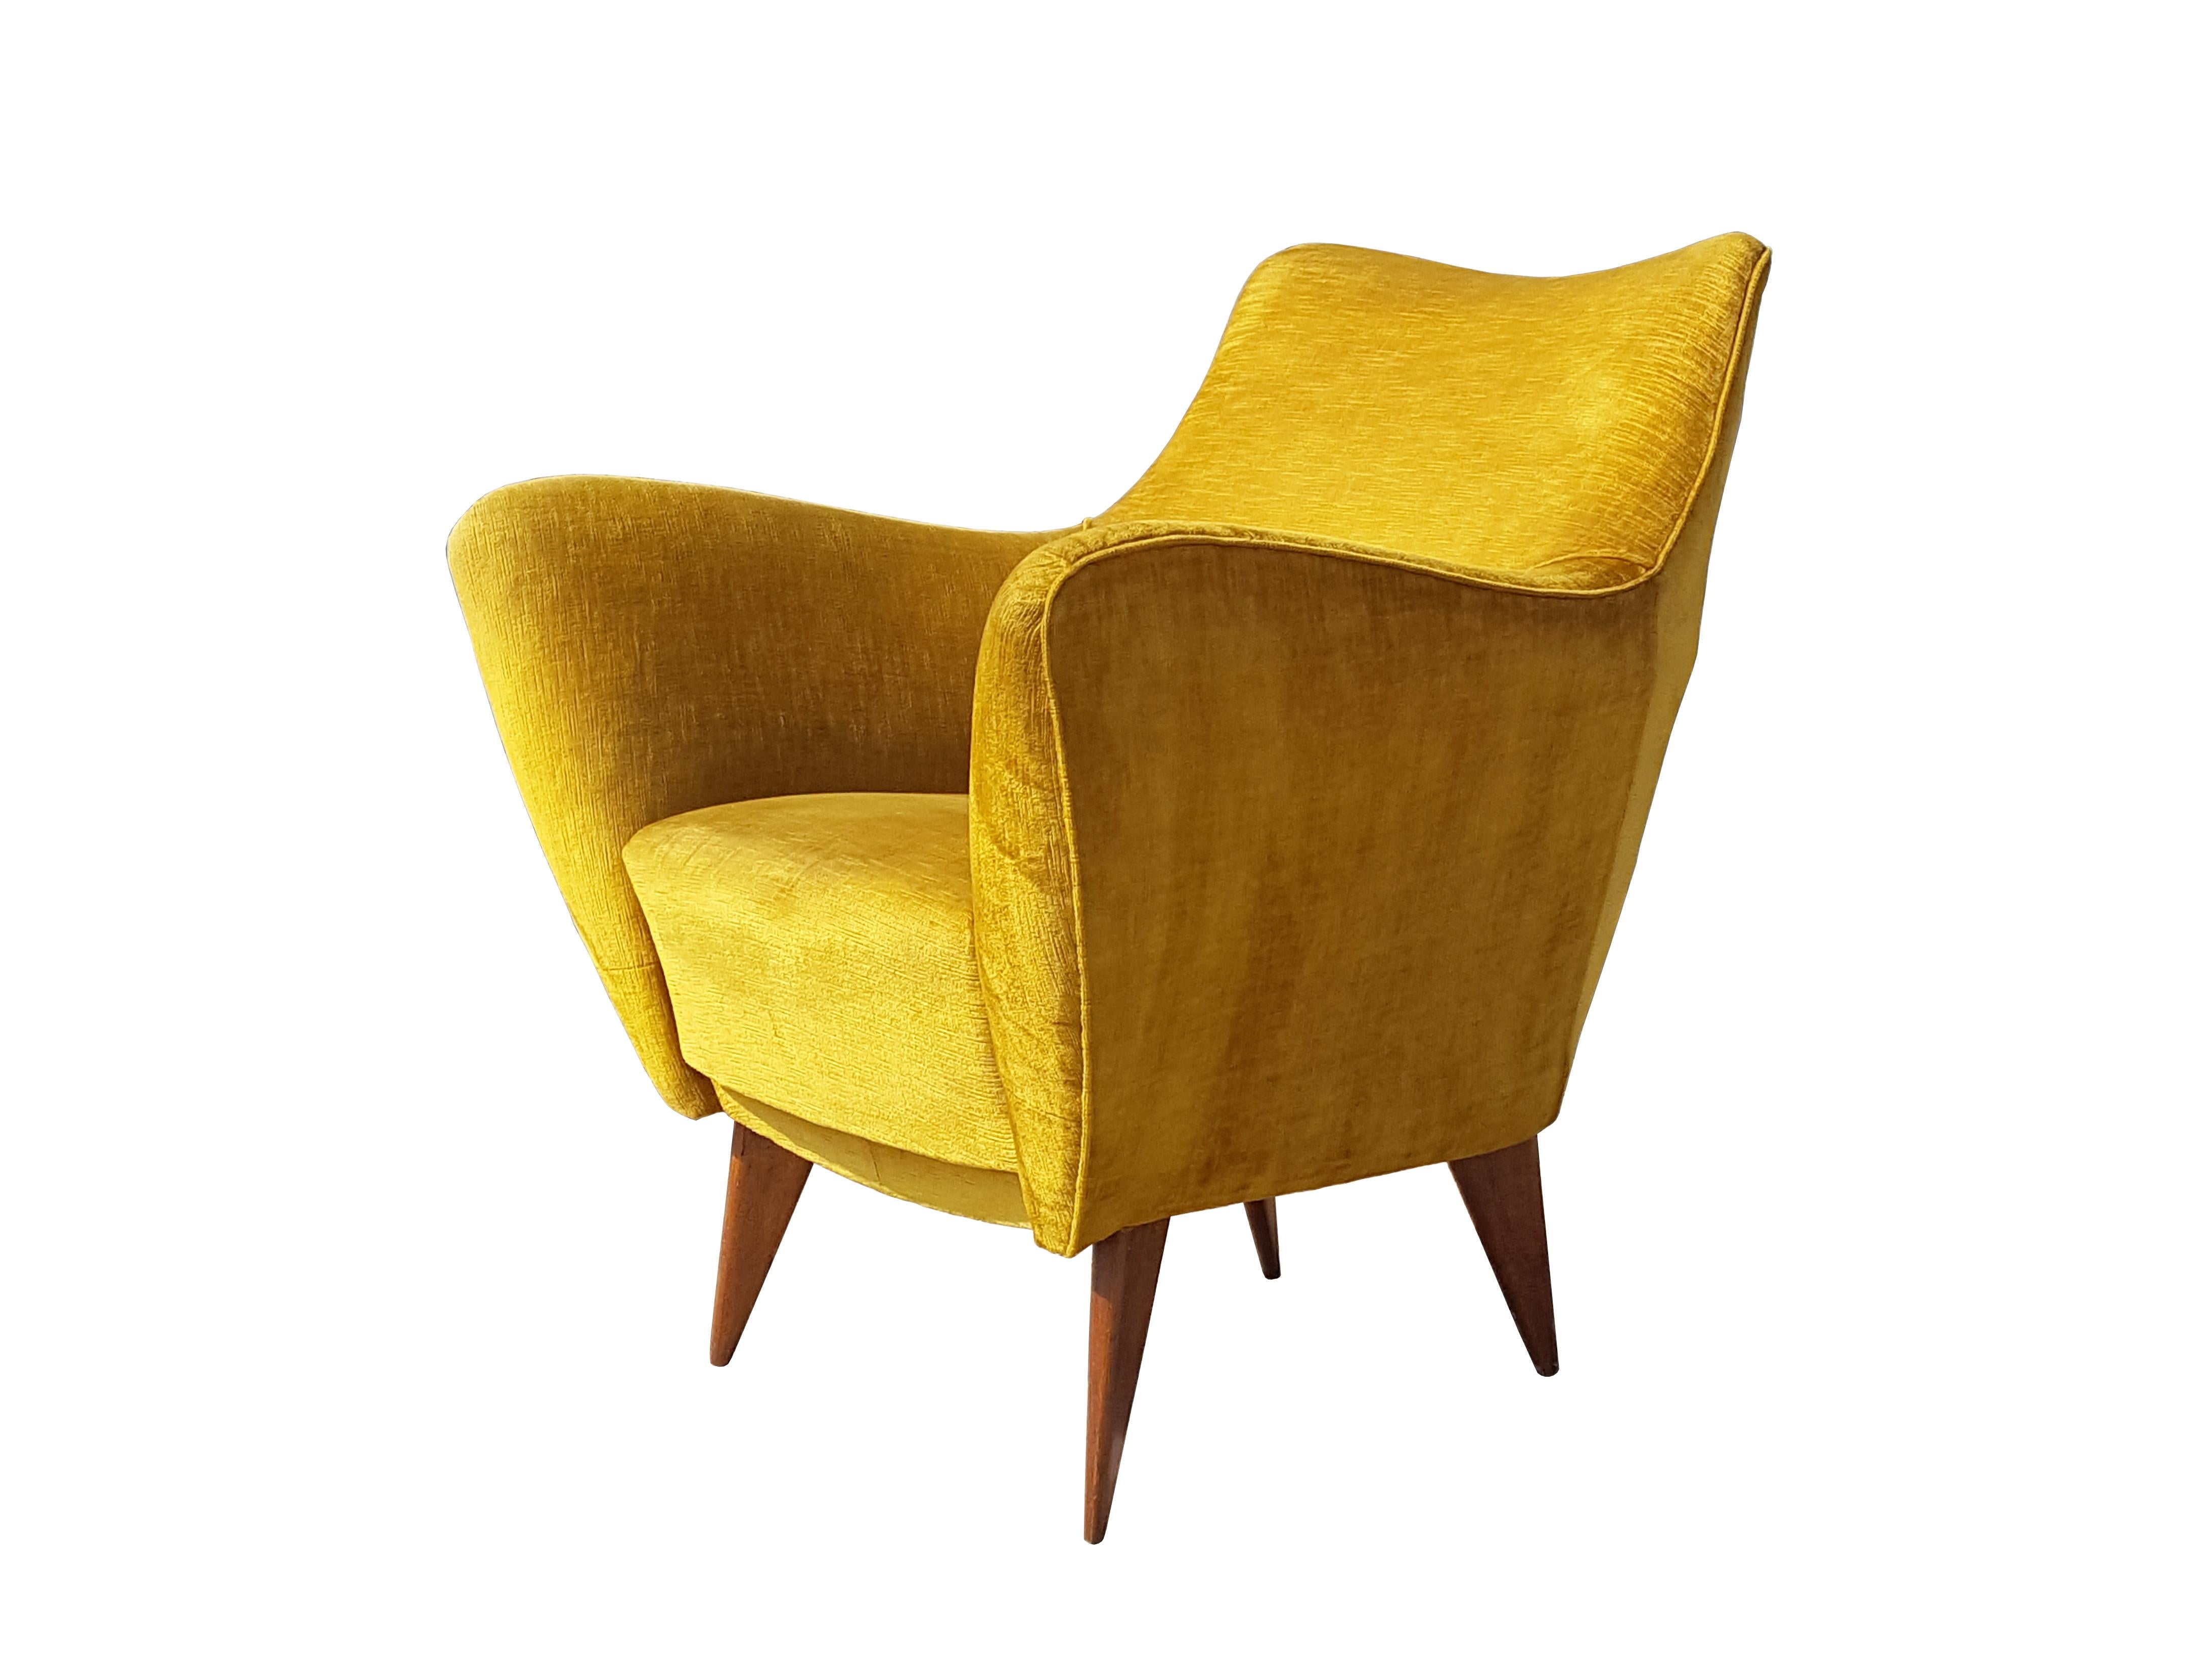 Mid-Century Modern Pair of Ocra Yellow Velvet and Wood 1950s Perla Armchair by G. Veronesi for ISA For Sale